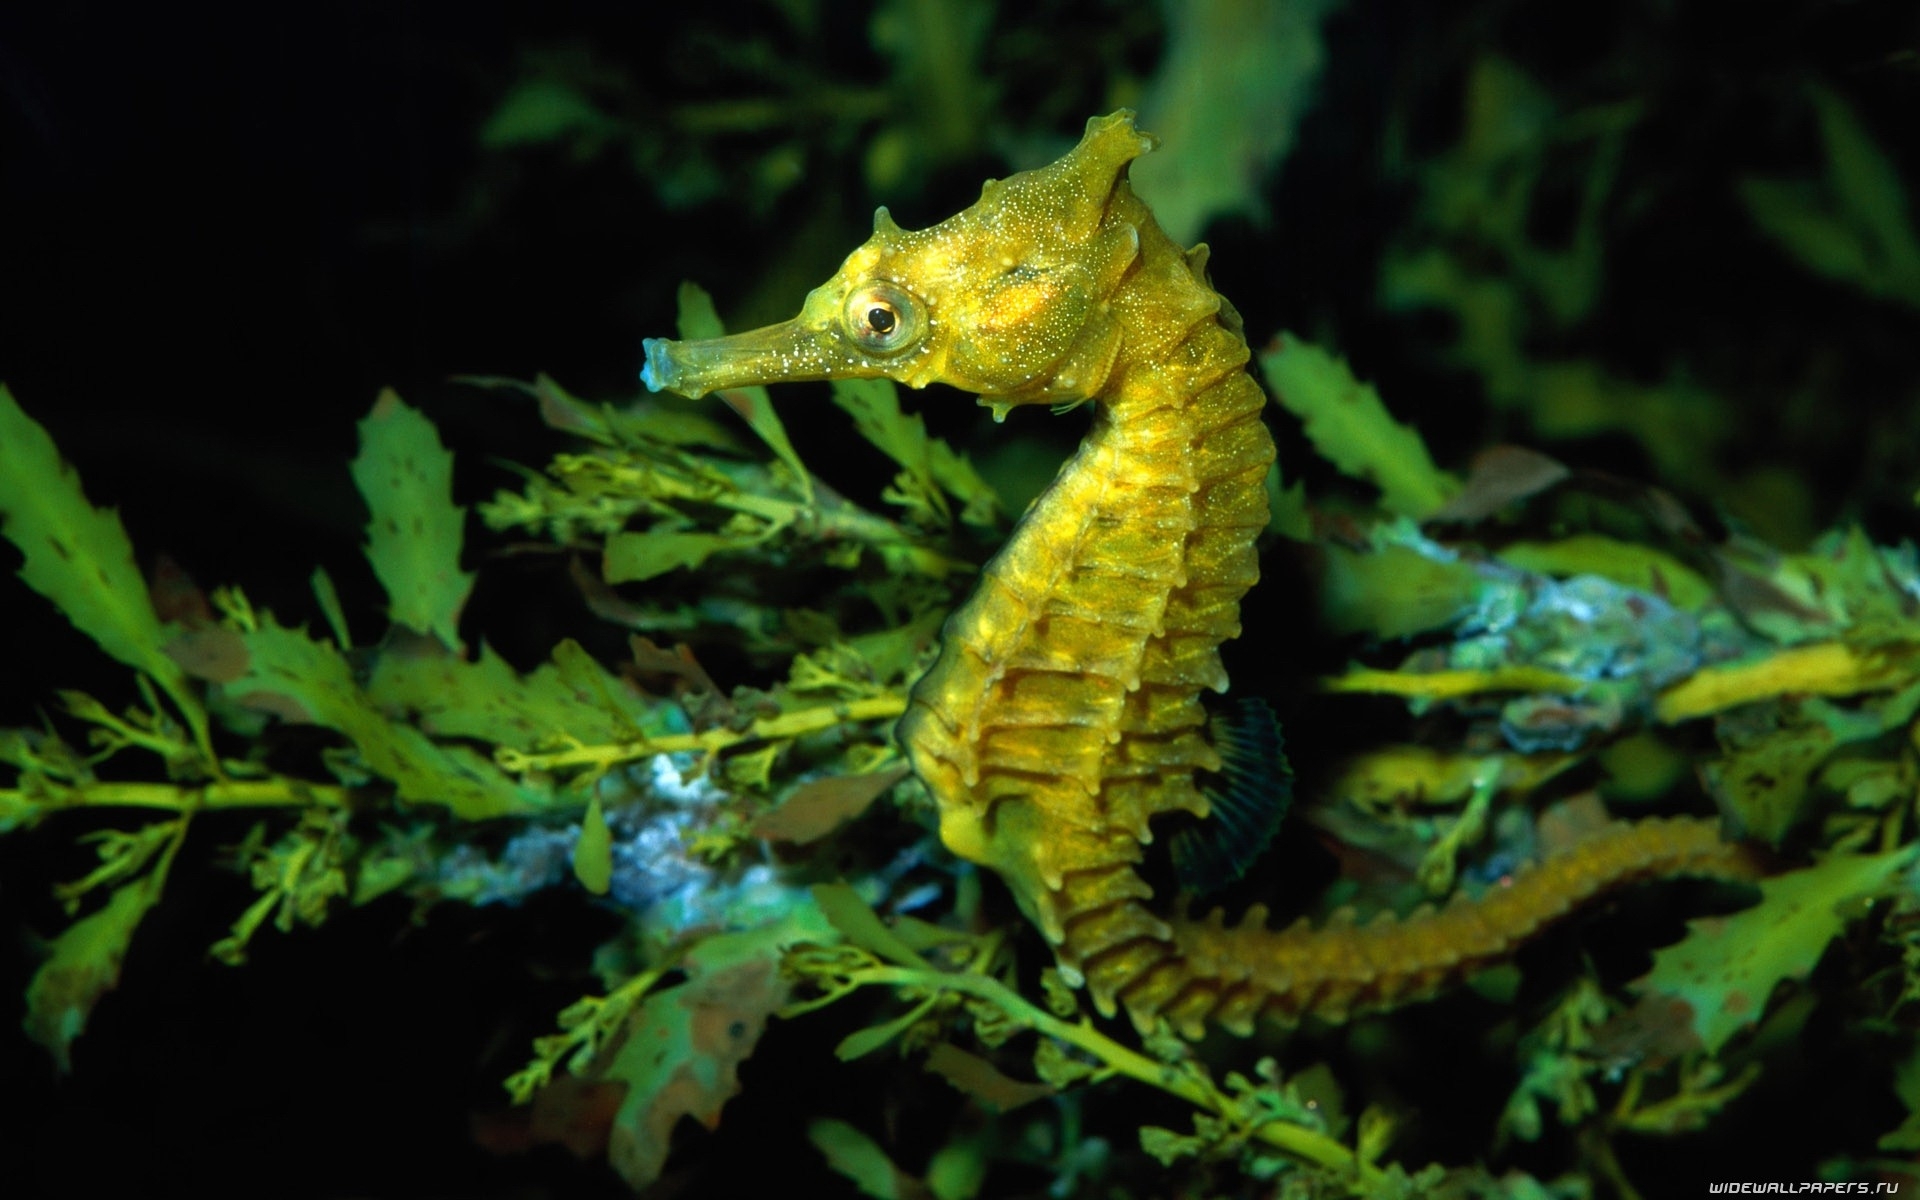 animals, Fishes, Seahorse, Plants, Leaves, Underwater, Ocean, Sea, Life, Nature Wallpaper